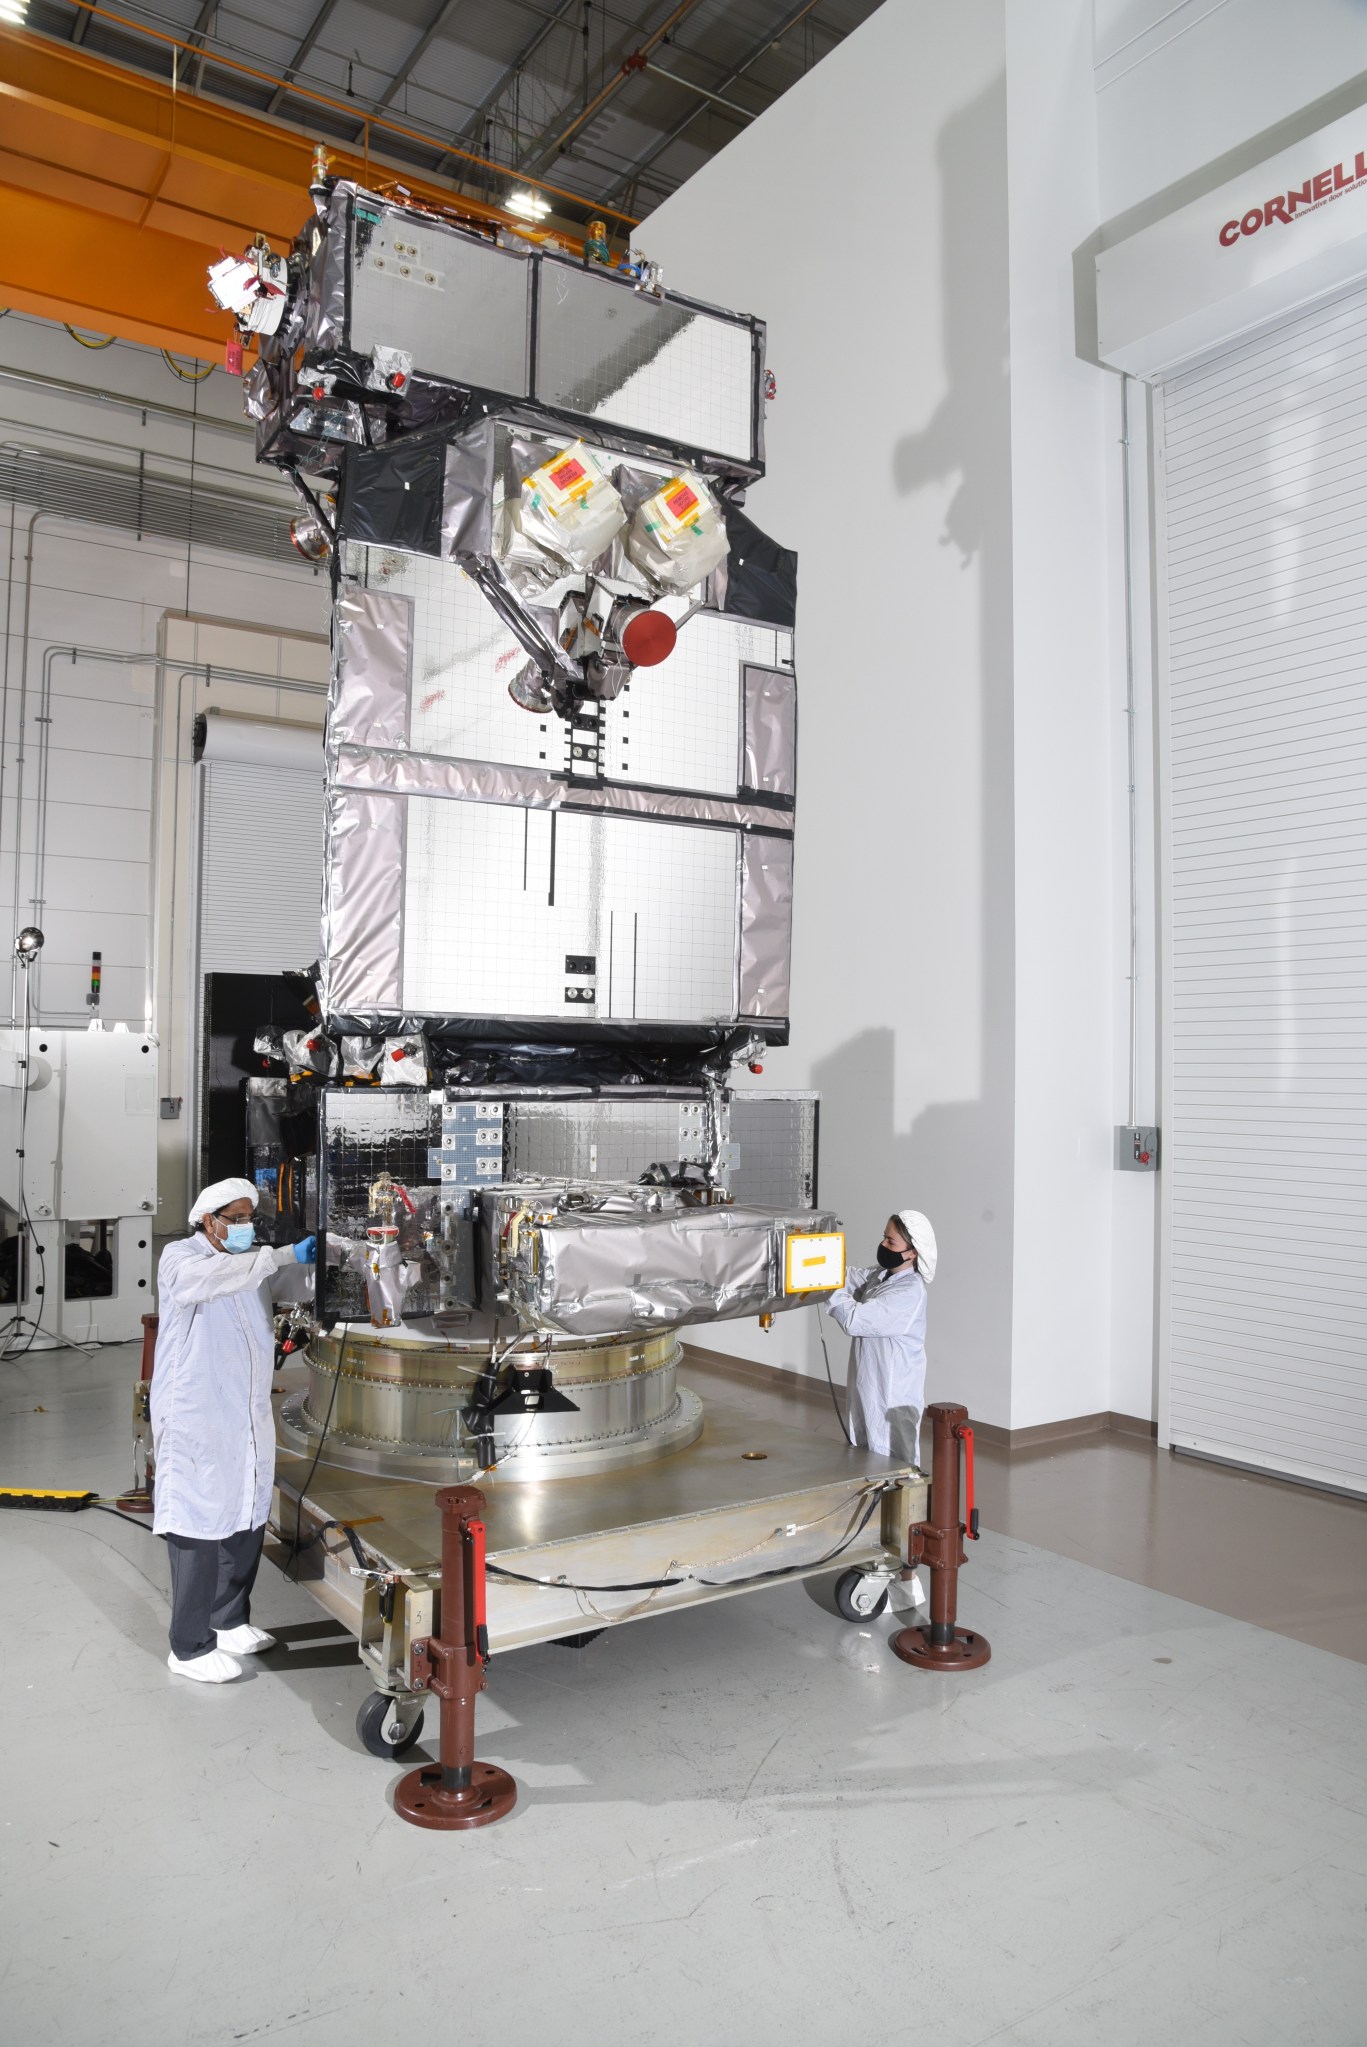 Northrop Grumman personnel examine the U.S. Space Force Space and Missile Systems Center’s Space Test Program Satellite 6 at its facility in Dulles, Virginia, prior to its shipment to Florida for final launch processing.